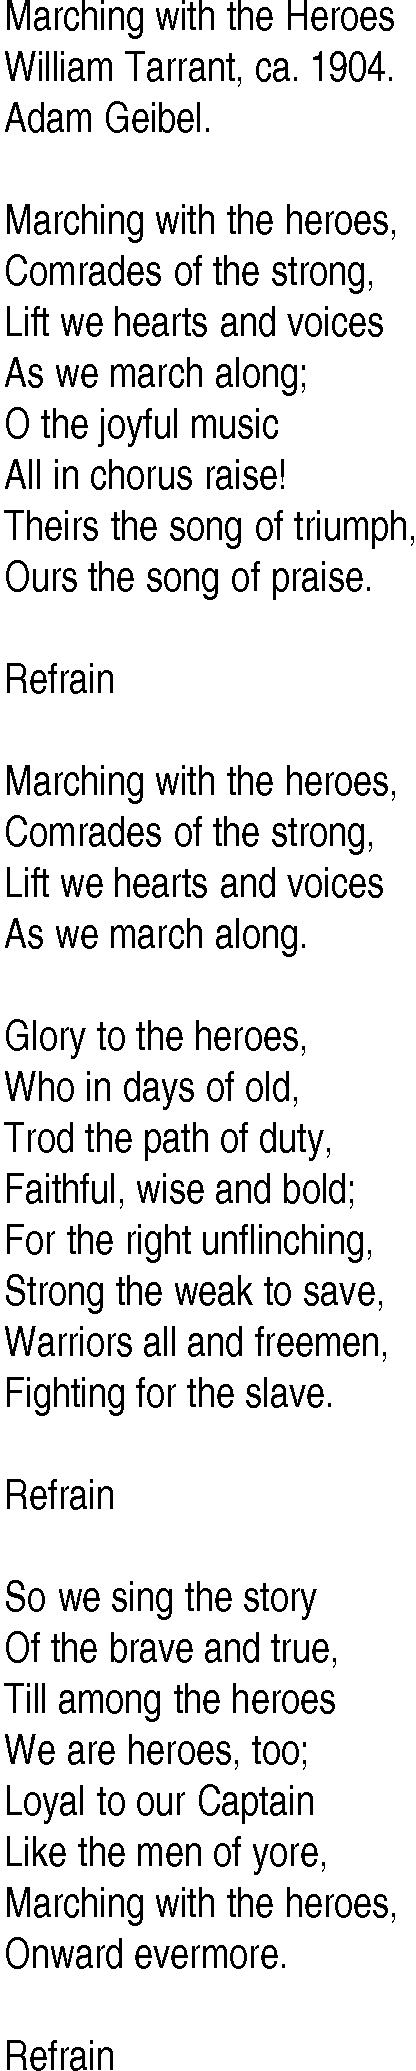 Hymn and Gospel Song: Marching with the Heroes by William Tarrant ca lyrics